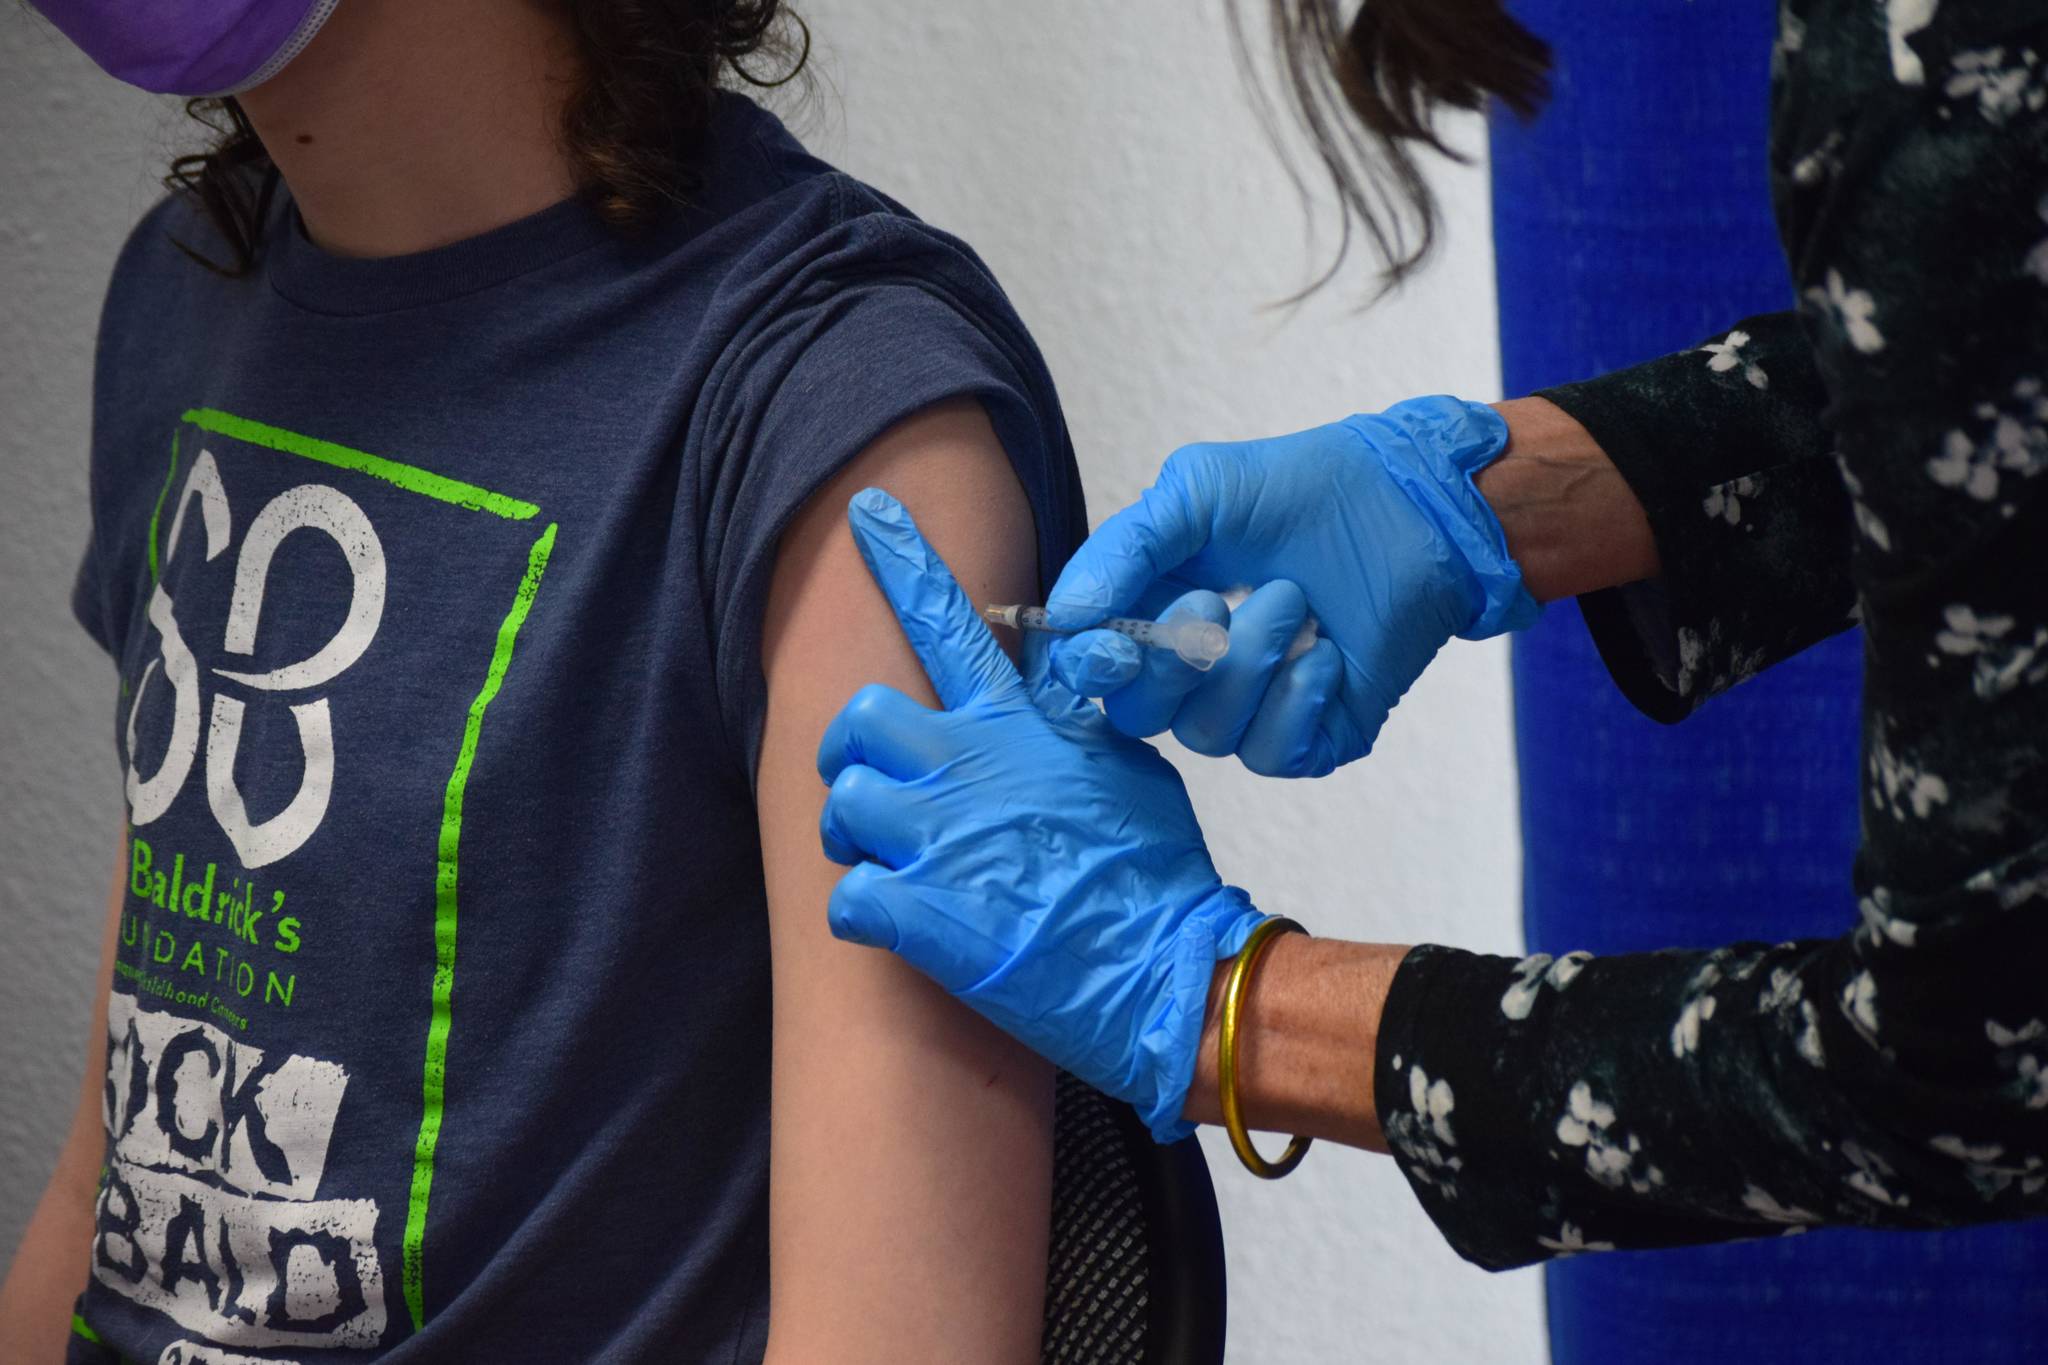 Gavin Hunt, 13, receives his second dose of the Pfizer-BioNTech vaccine at the walk-in clinic at the intersection of the Kenai Spur and Sterling Highways in Soldotna, Alaska on Wednesday, June 9, 2021. (Camille Botello / Peninsula Clarion)